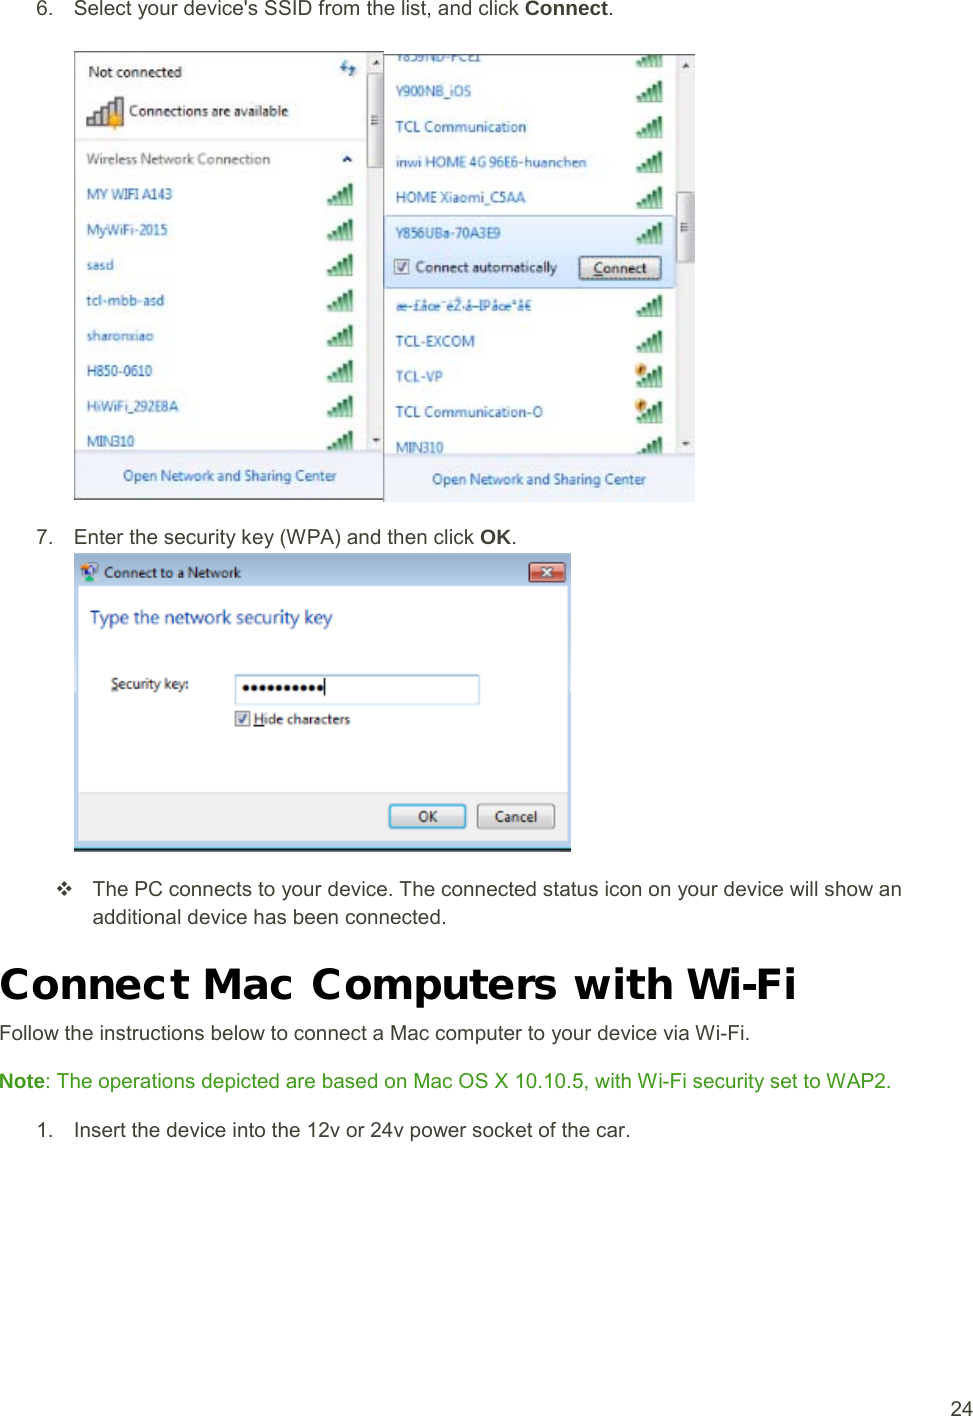  24 6. Select your device&apos;s SSID from the list, and click Connect7. Enter the security key (WPA) and then click .   OK The PC connects to your device. The connected status icon on your device will show an additional device has been connected. .  Connect Mac Computers with Wi-Fi Follow the instructions below to connect a Mac computer to your device via Wi-Fi. Note1. Insert the device into the 12v or 24v power socket of the car. : The operations depicted are based on Mac OS X 10.10.5, with Wi-Fi security set to WAP2. 